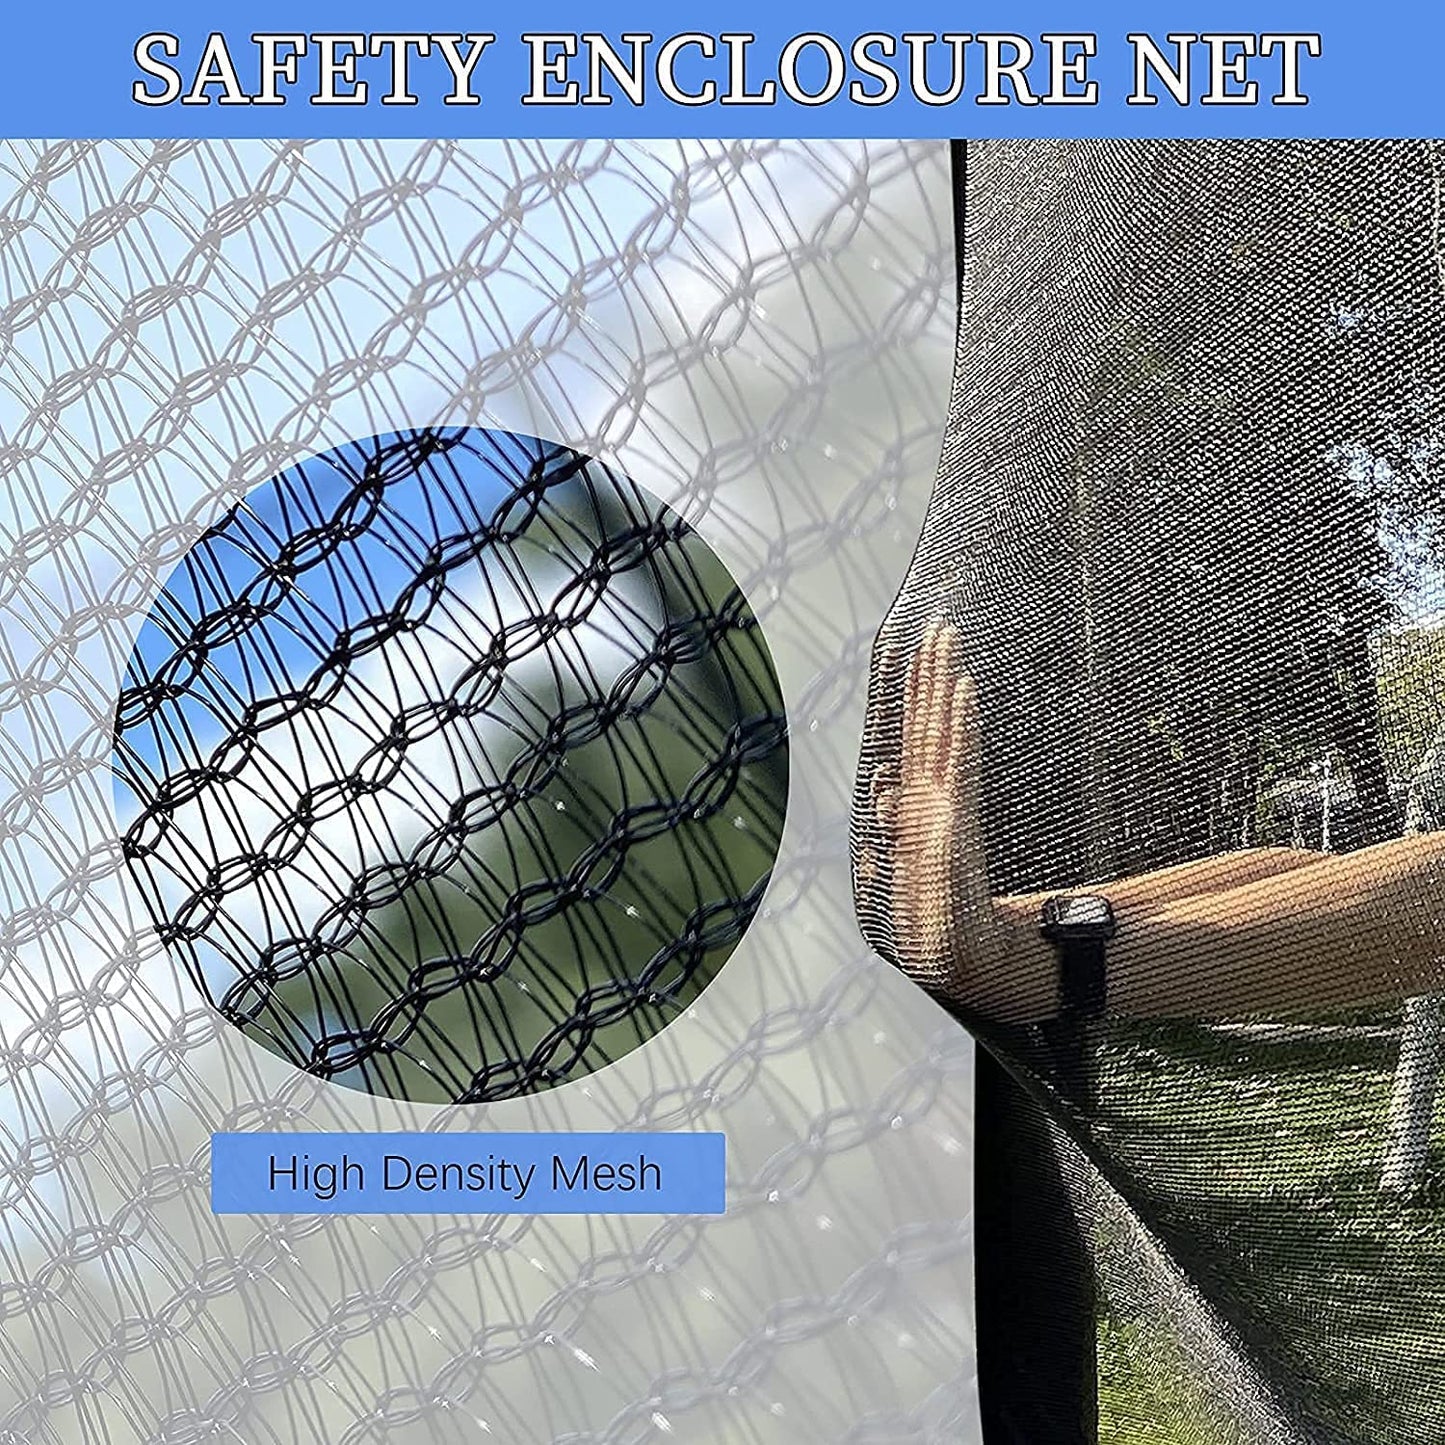 YAKEY 12FT Trampoline with Safety Enclosure Net